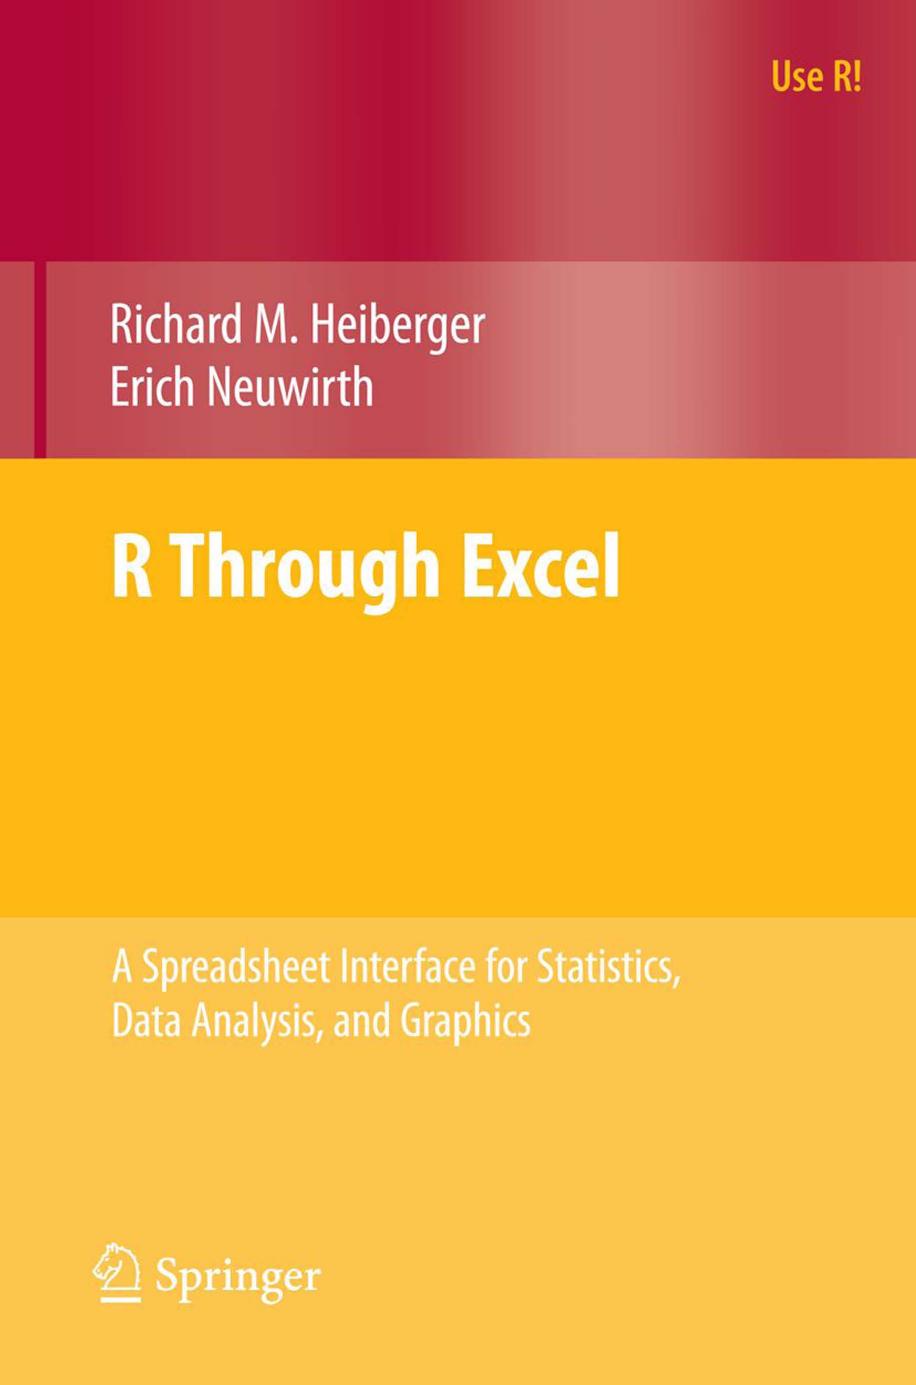 R-Through-Excel-A-Spreadsheet-Interface-for-Statistics-Data-Analysis-And-Graphics